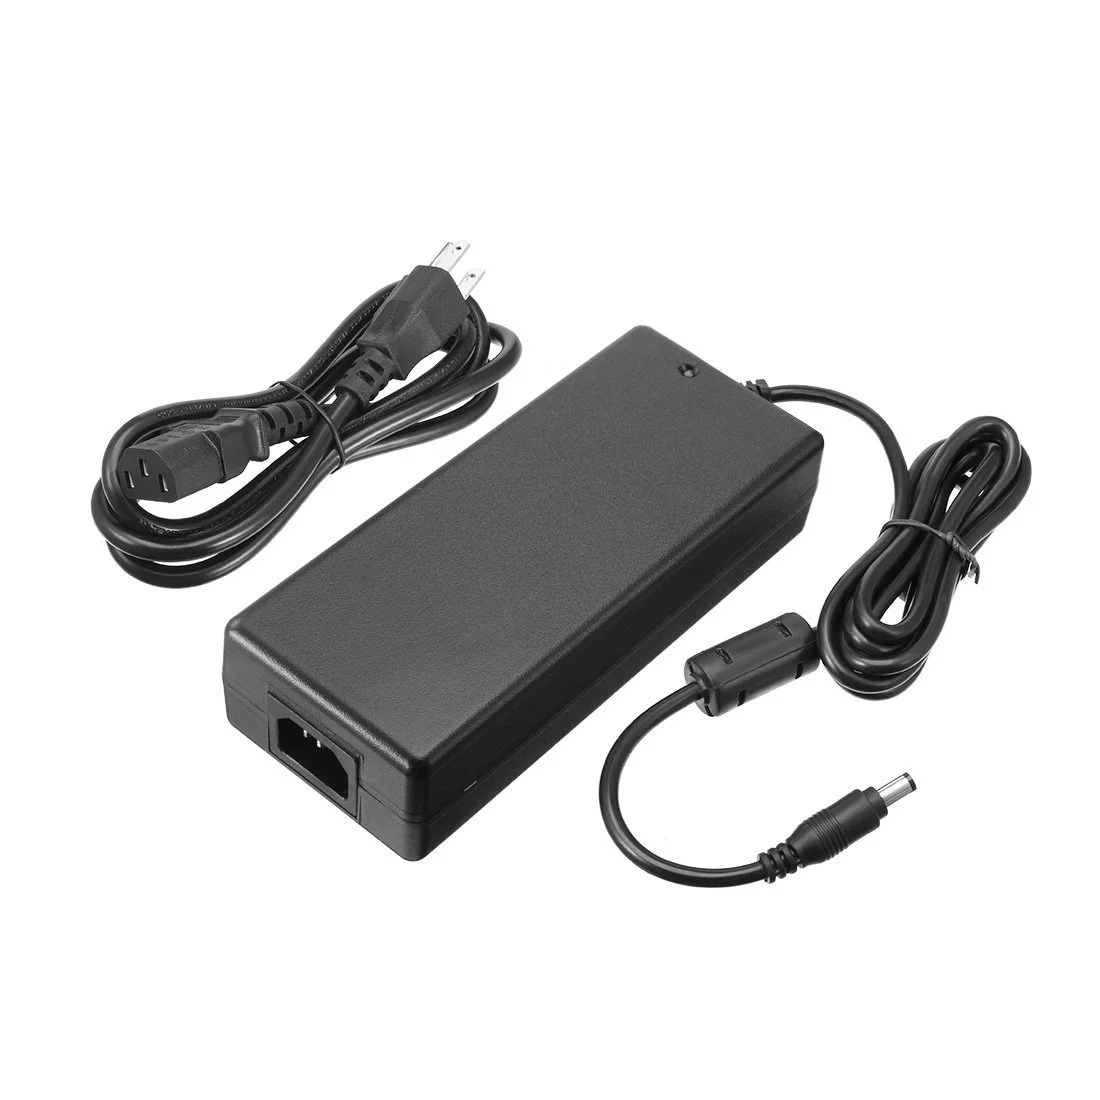 5V 10A AC DC Adapter & Power Supply